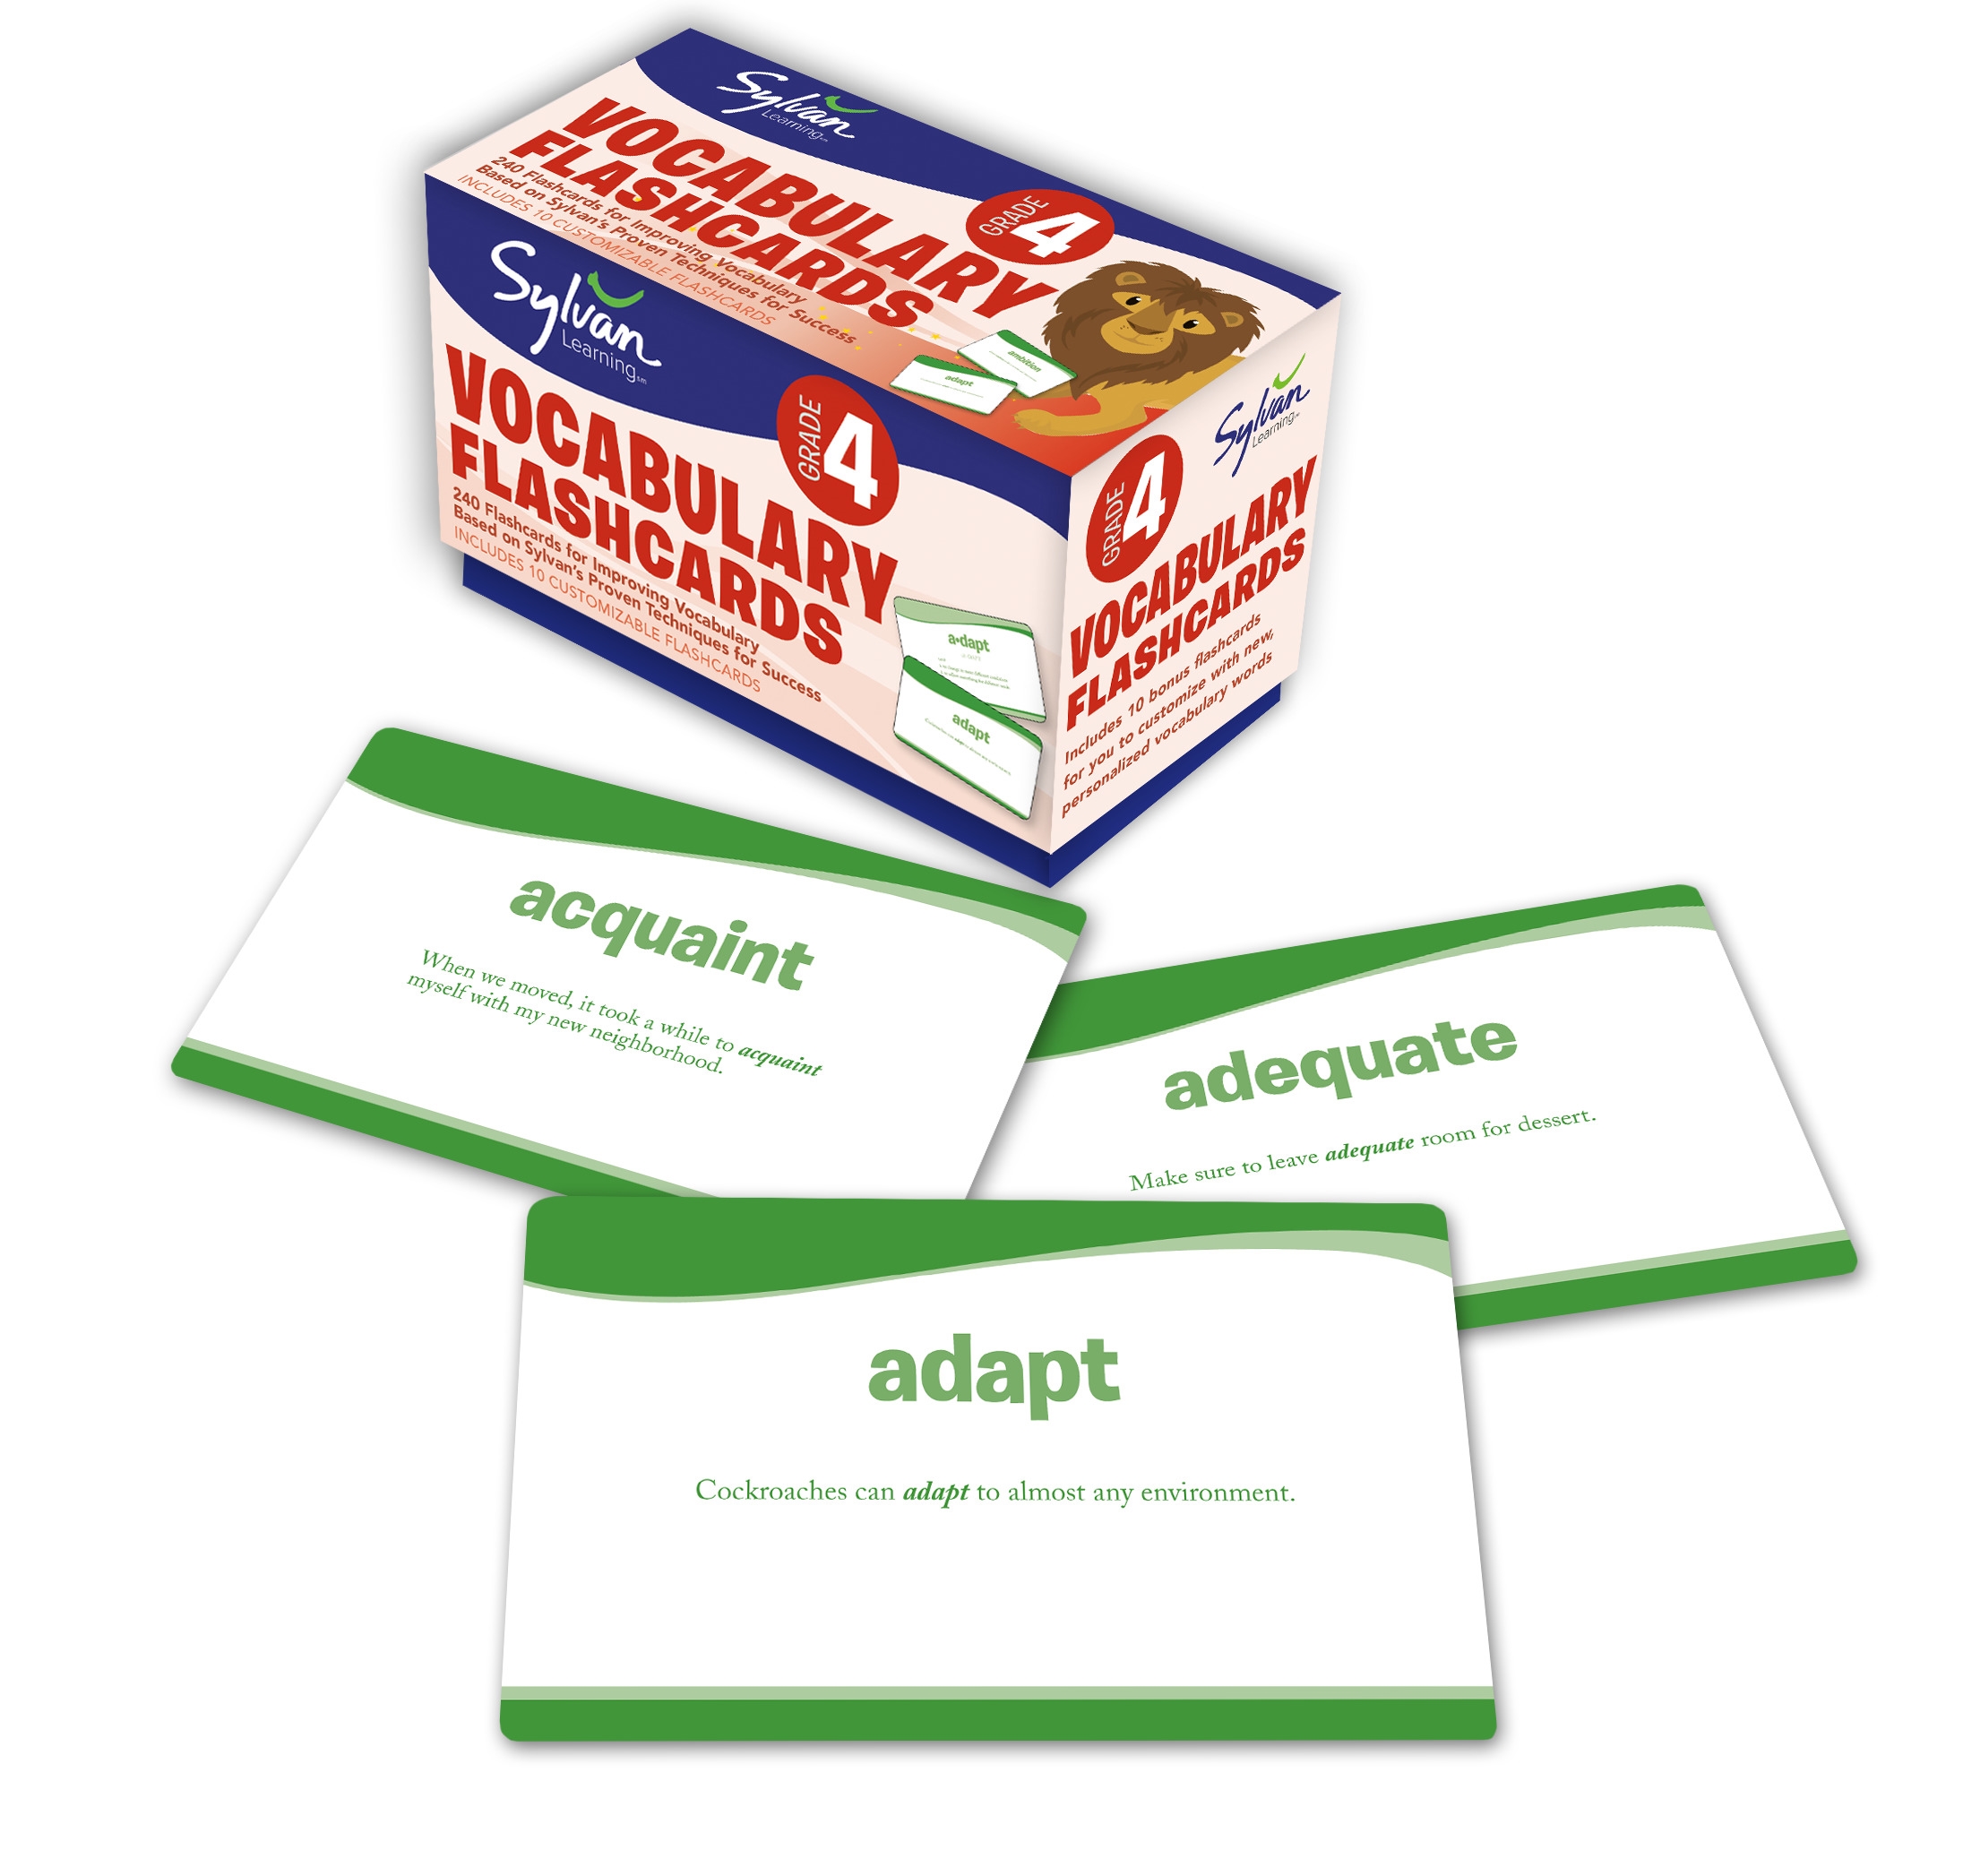 4th-grade-vocabulary-flashcards-by-sylvan-learning-penguin-books